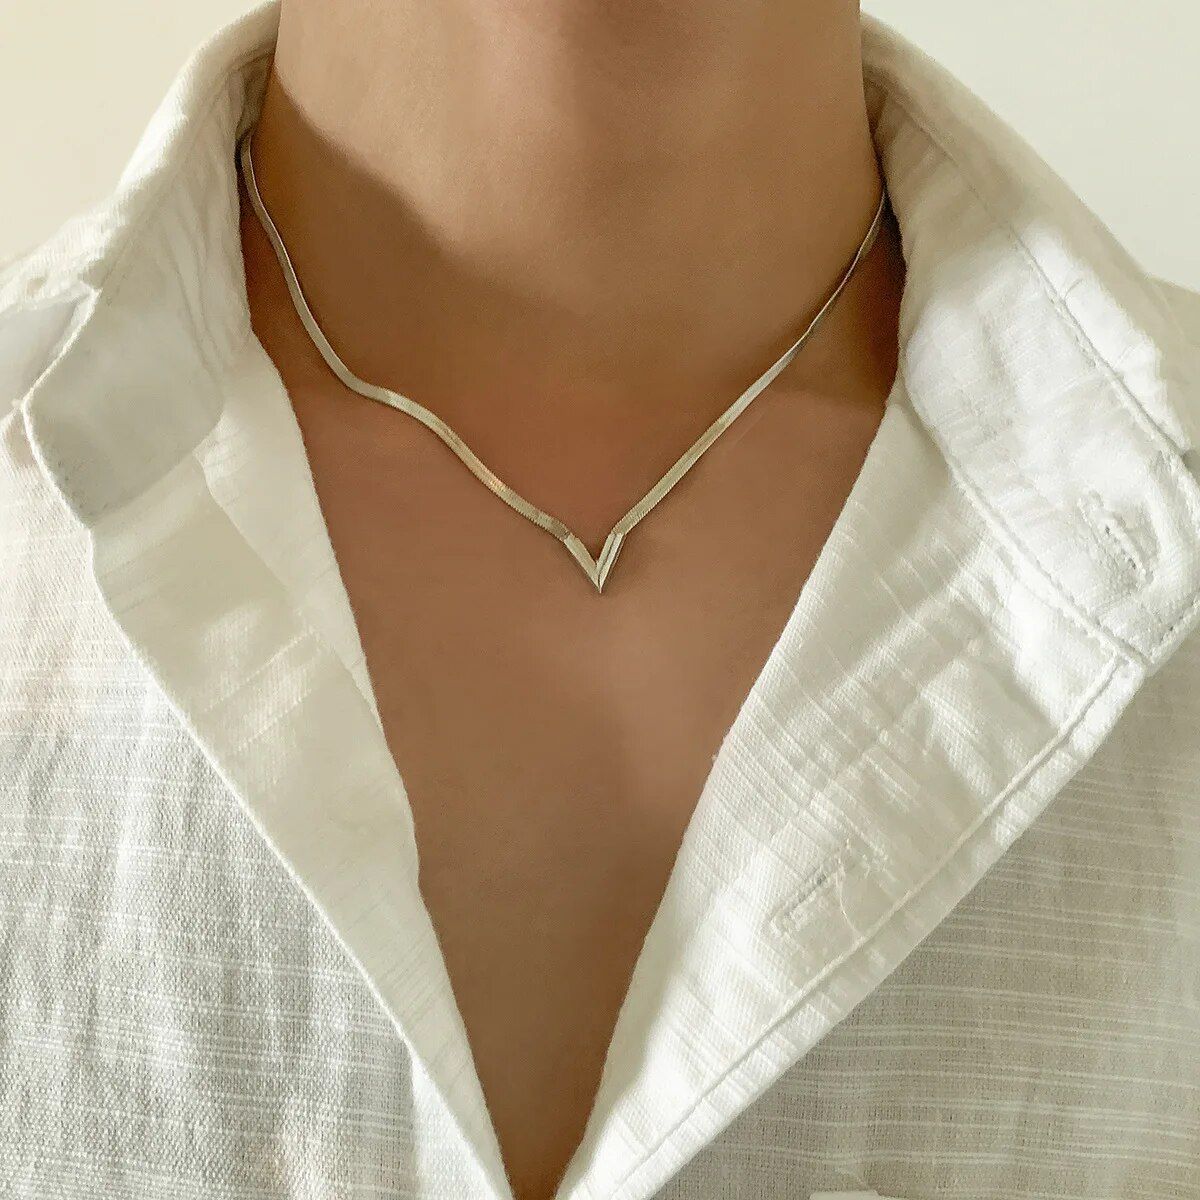 Close-up of a person wearing a white shirt with an Elegant V-Shaped Flat Snake Chain Necklace, focusing on the collar area, reflecting new fashion trends.